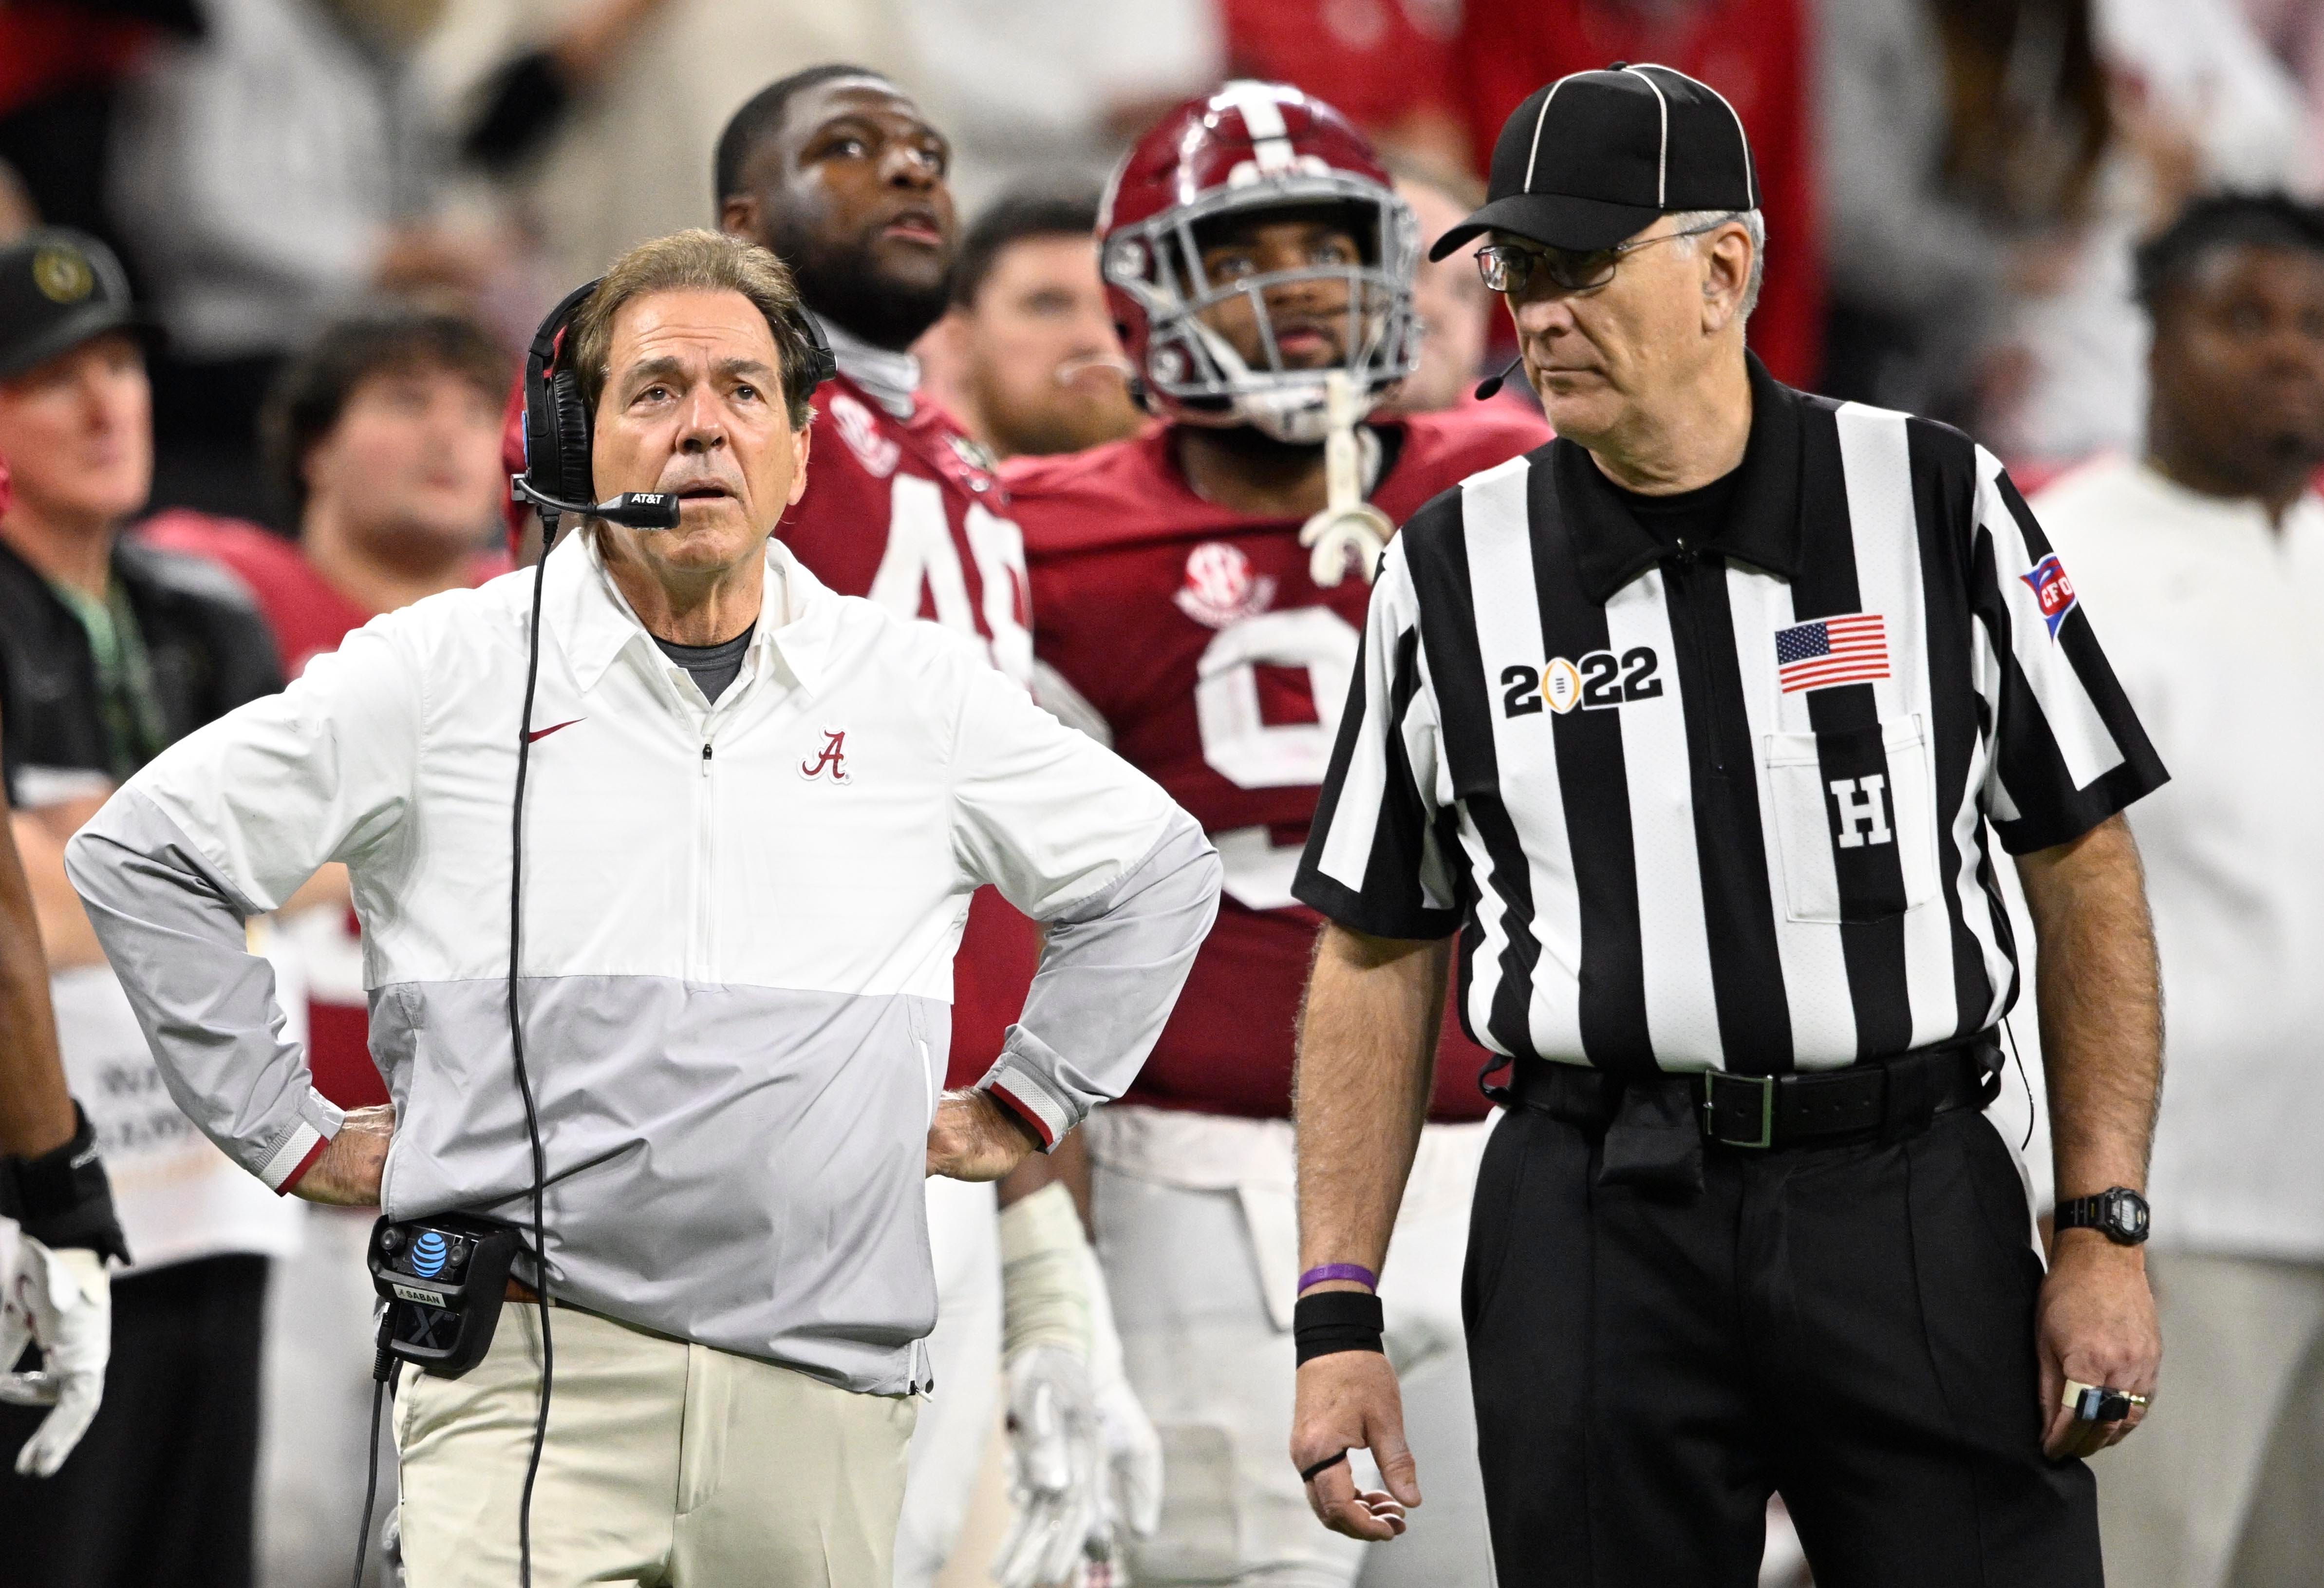 What's next for Alabama football recruiting after national championship loss?